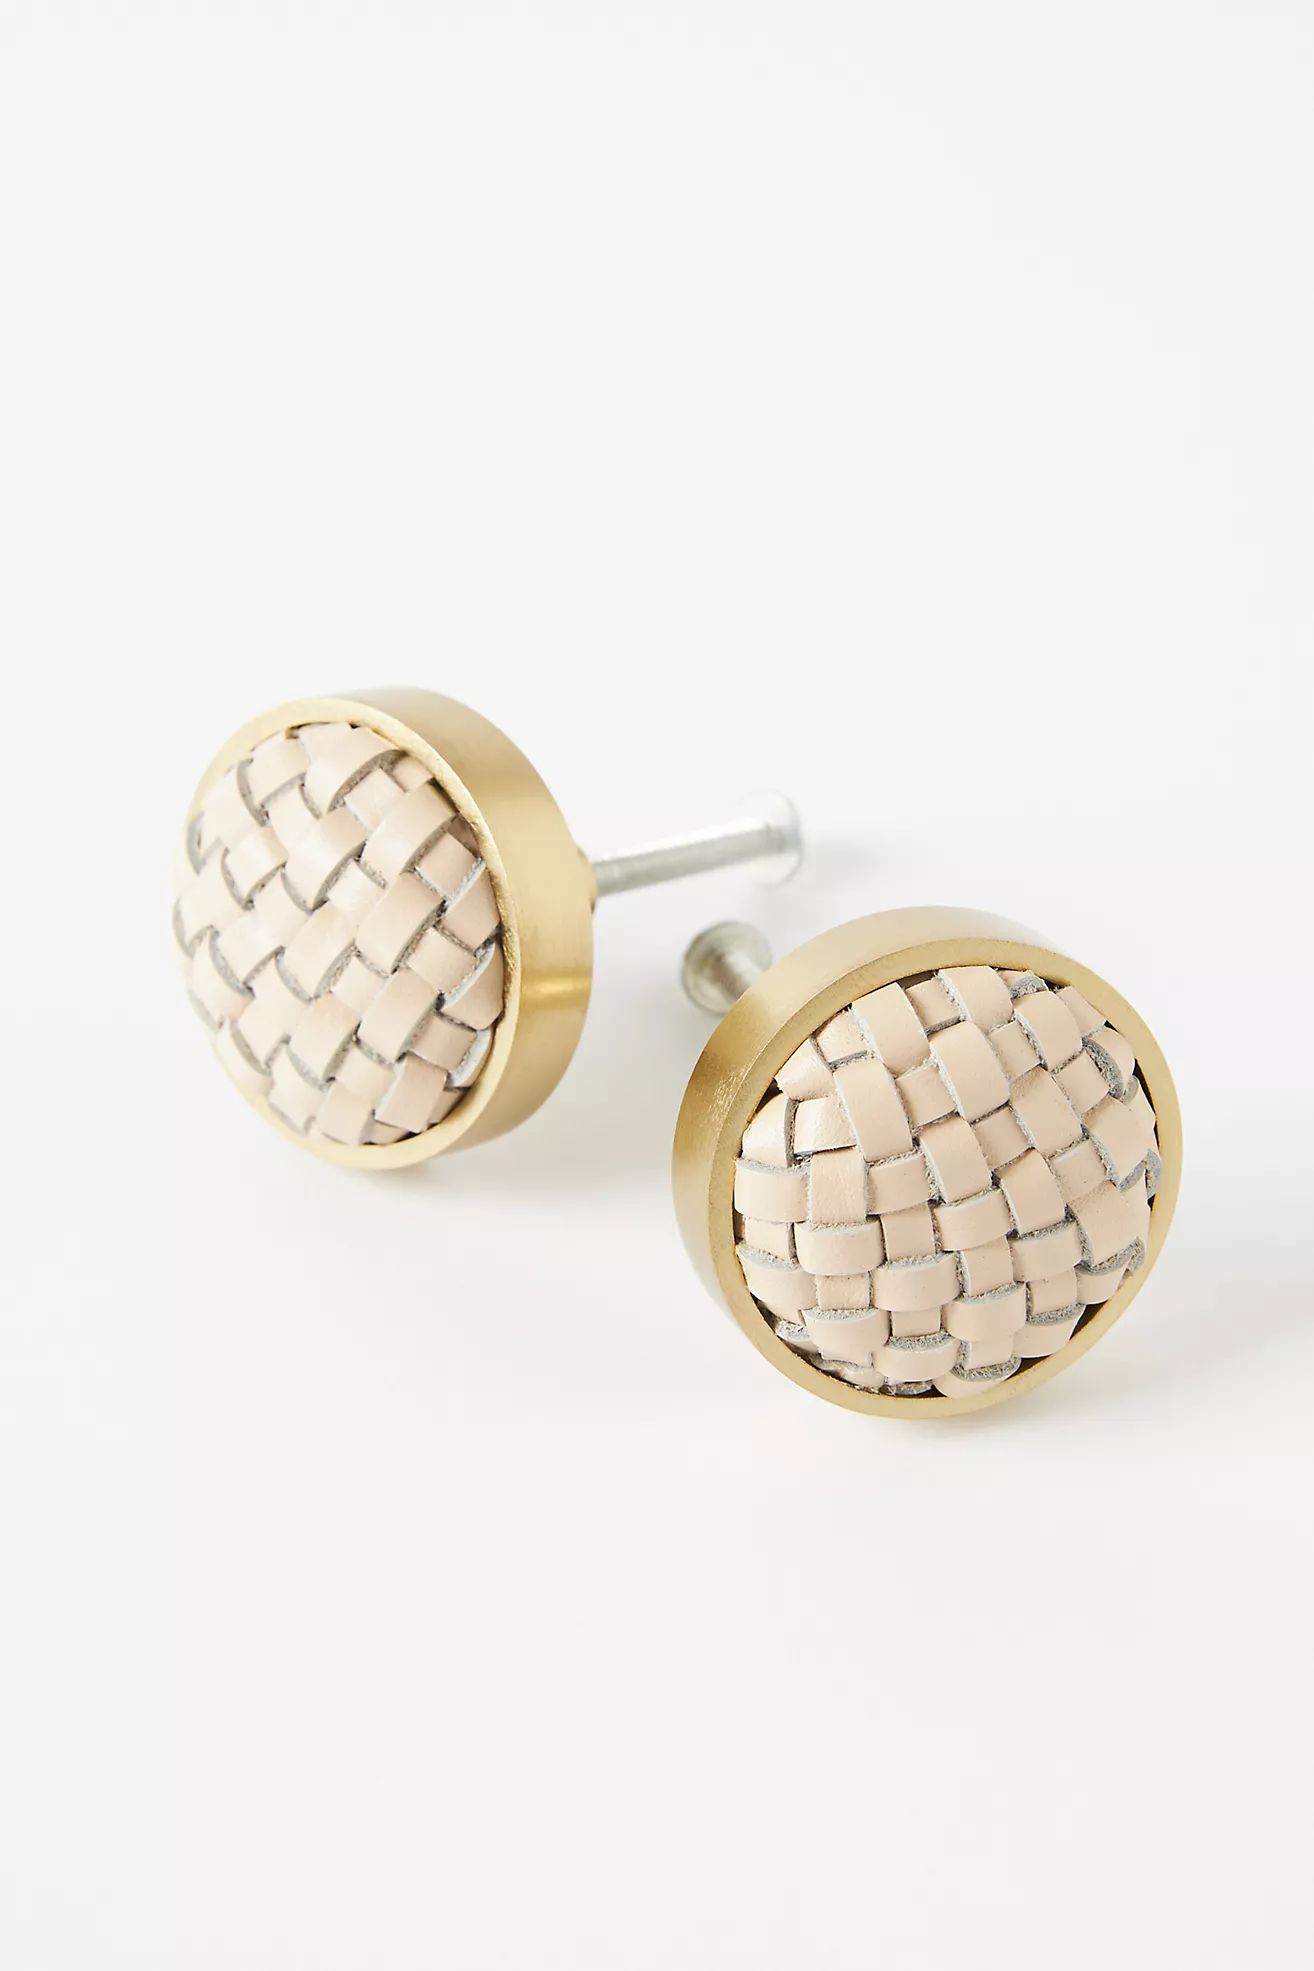 Woven Leather Knobs, Set of 2 | Anthropologie (US)